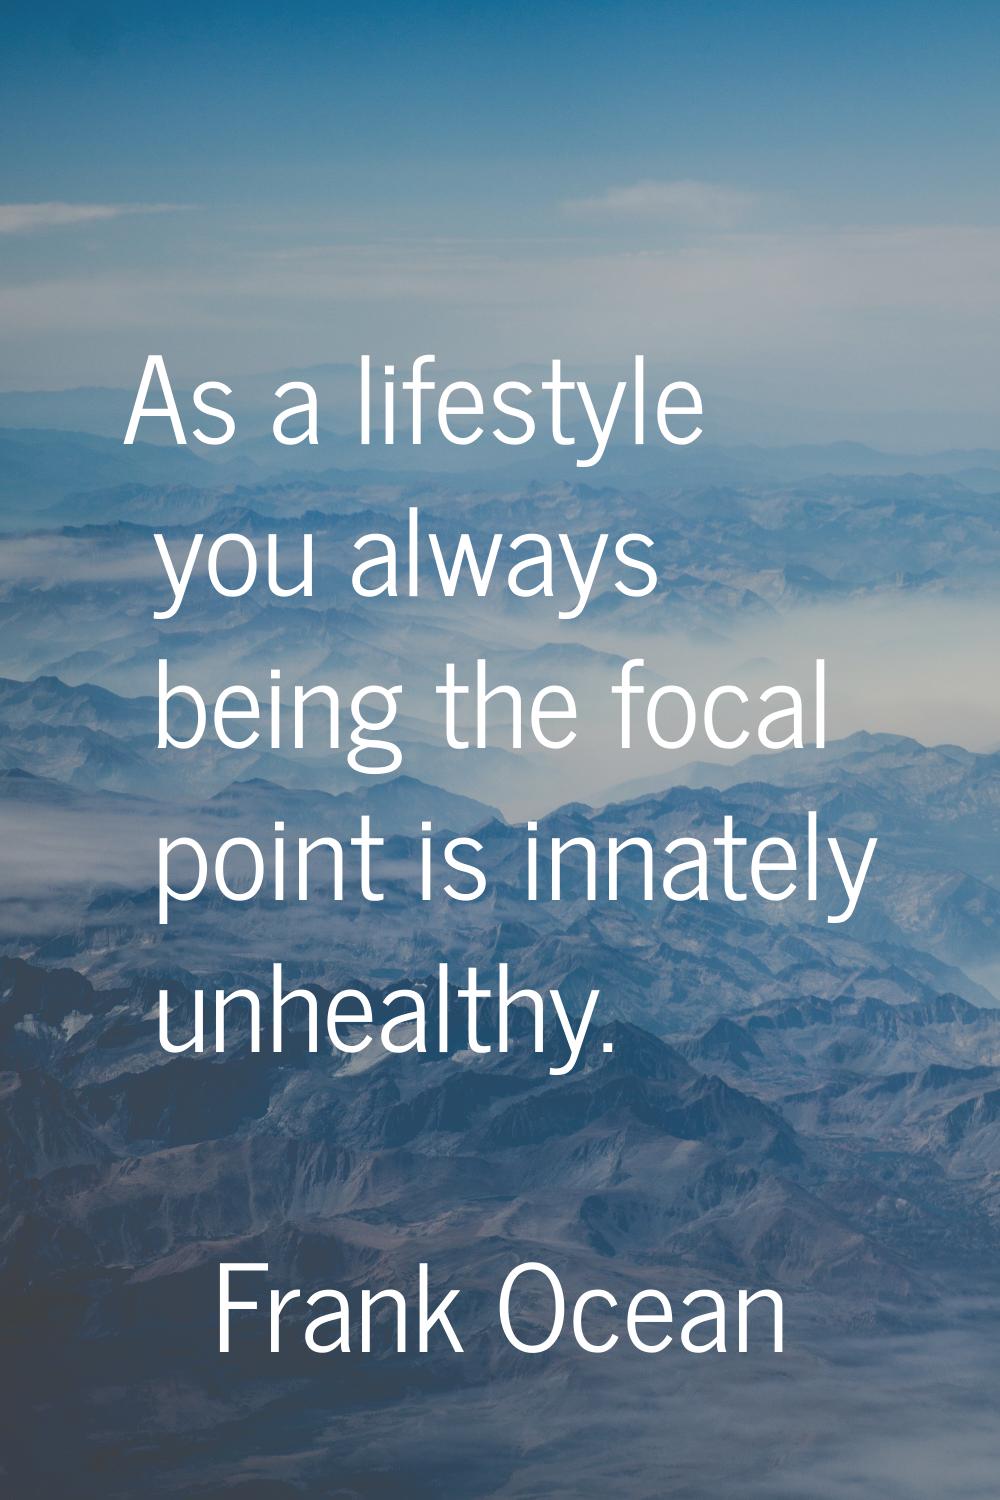 As a lifestyle you always being the focal point is innately unhealthy.